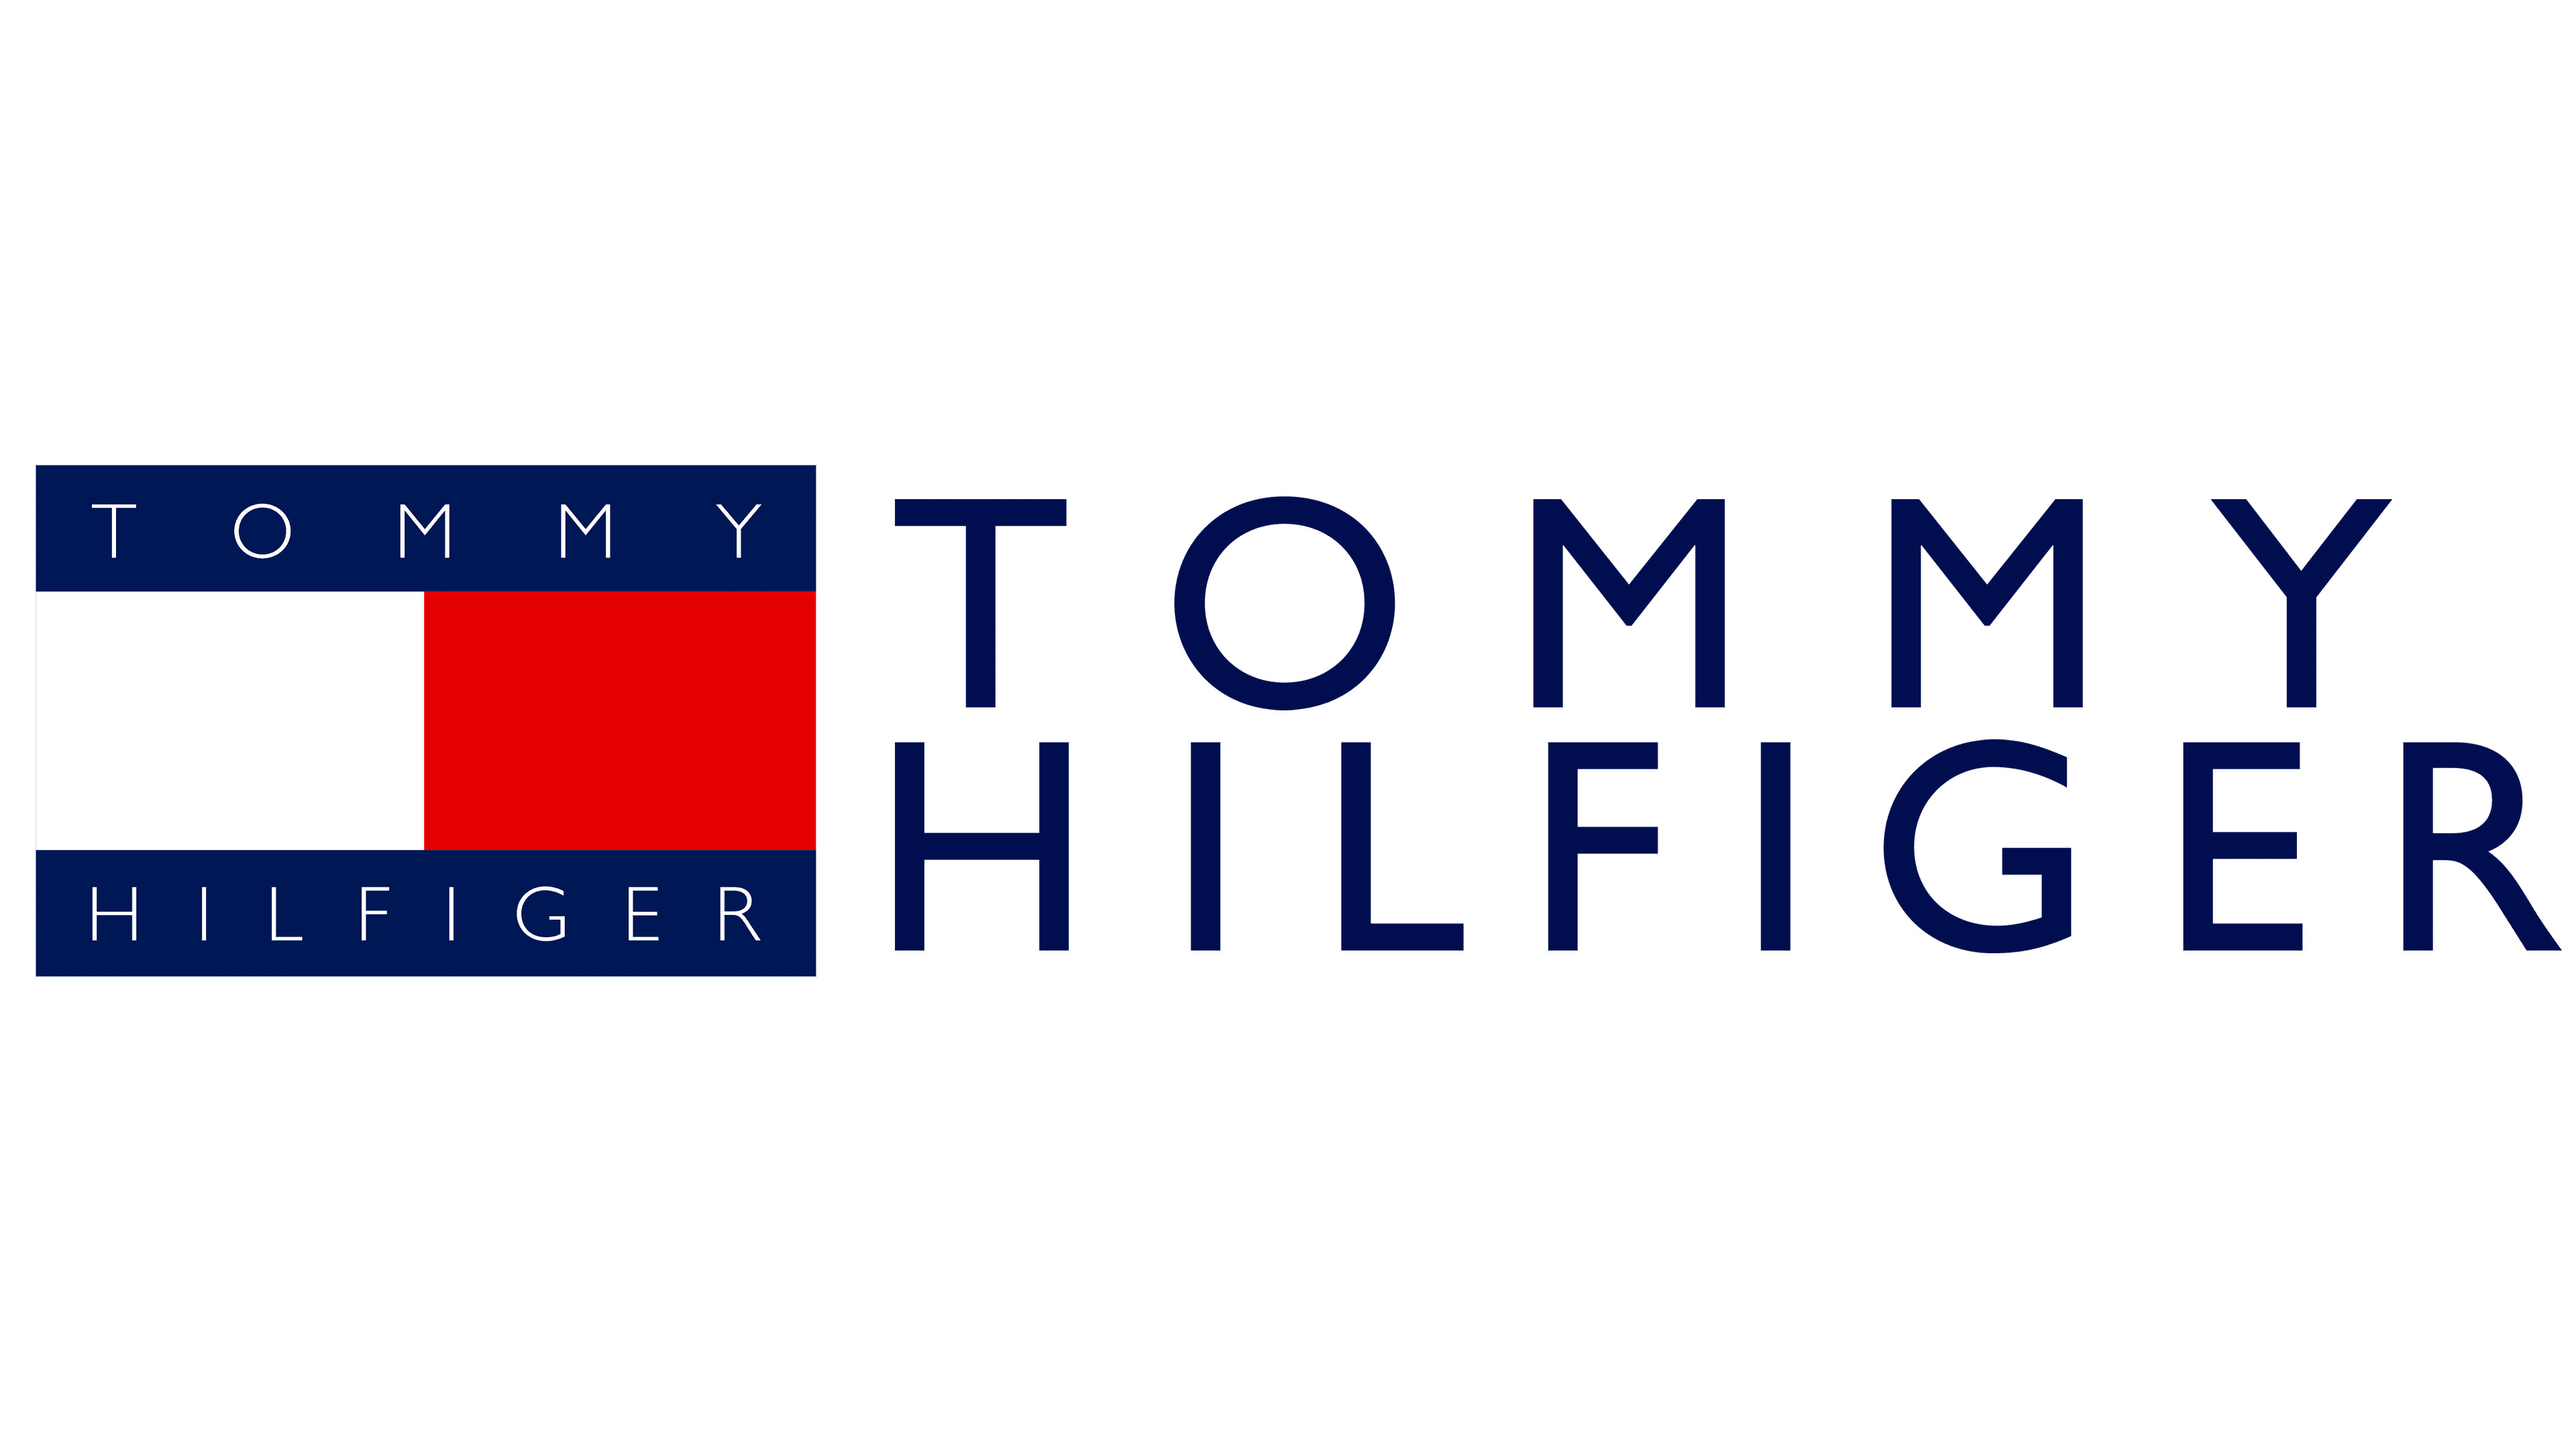 Tommy Hilfiger: A clothing brand founded in 1985, Manufacturing apparel, footwear, accessories. 3840x2160 4K Background.